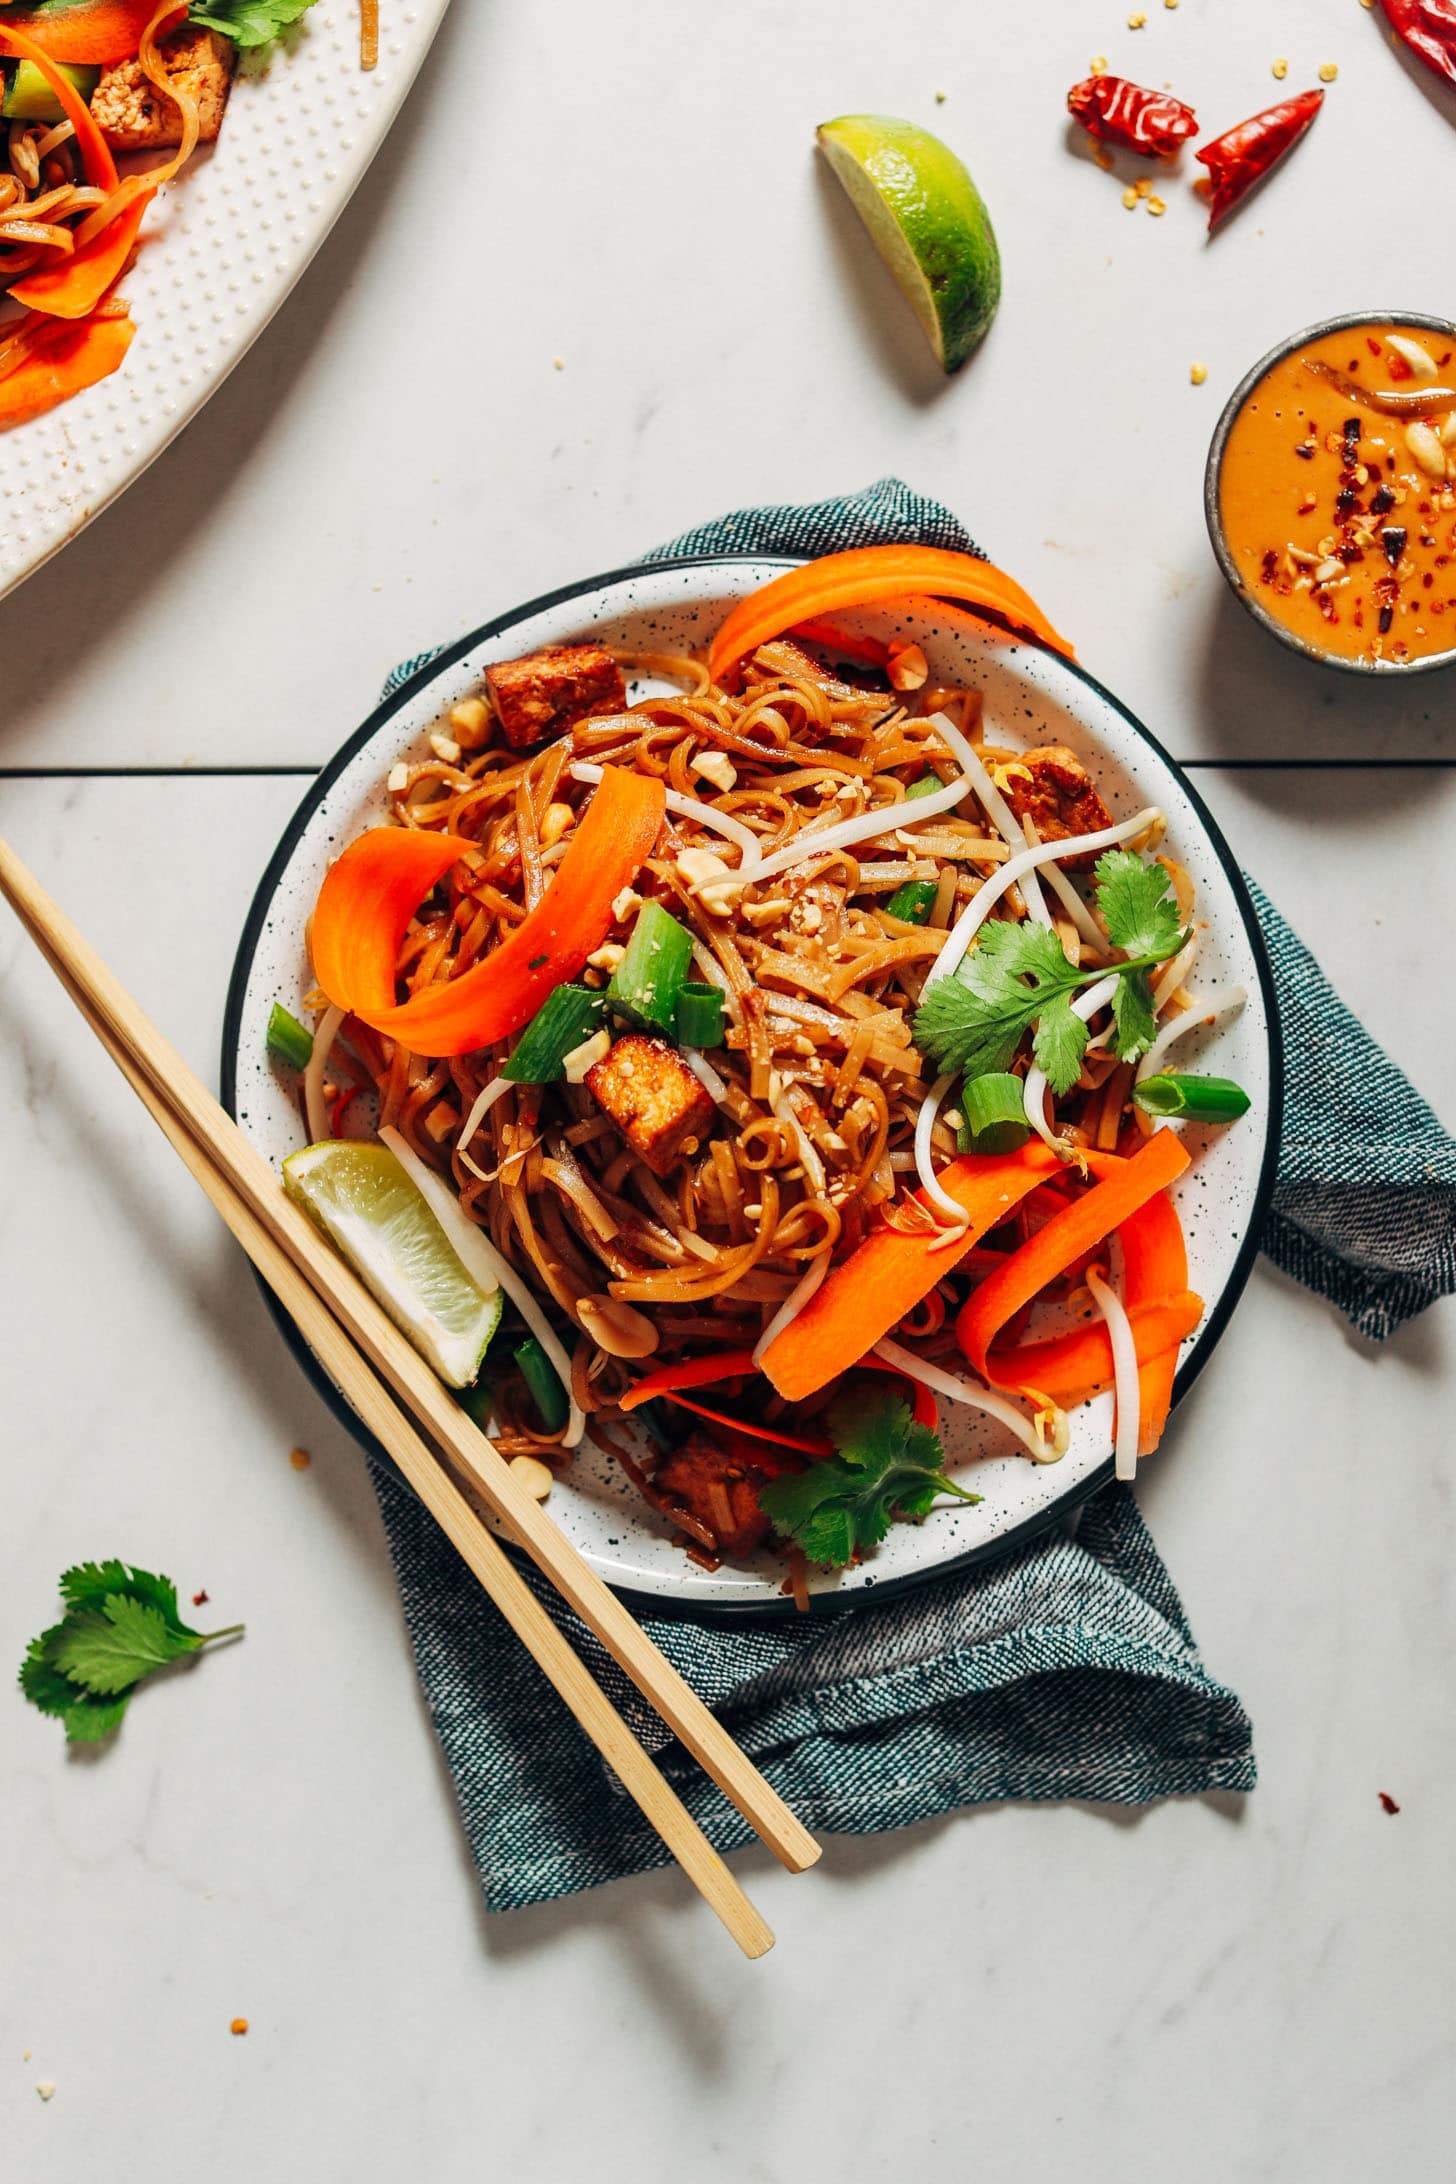 A serving of pad Thai on a plate garnished with lime wedges, bean sprouts, peanut sauce, shredded carrot, cilantro, and sriracha or chili garlic sauce.